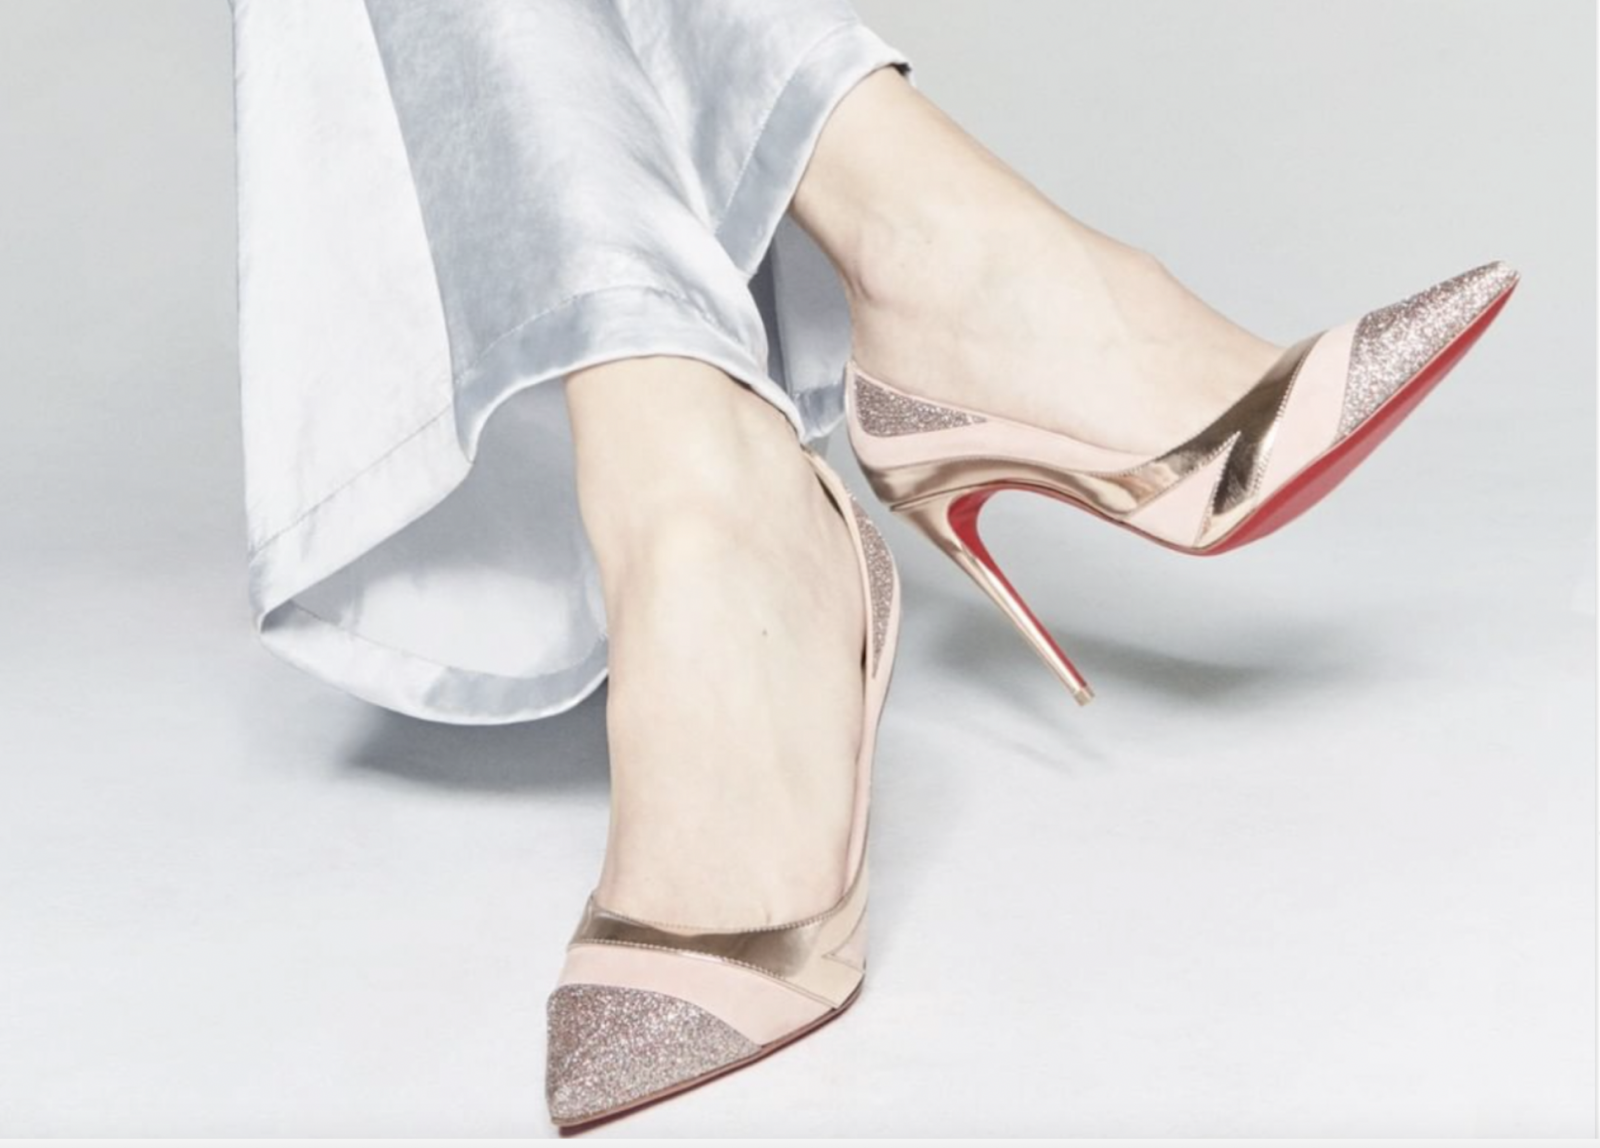 Christian Louboutin: The Footwear News Cover Story – Footwear News